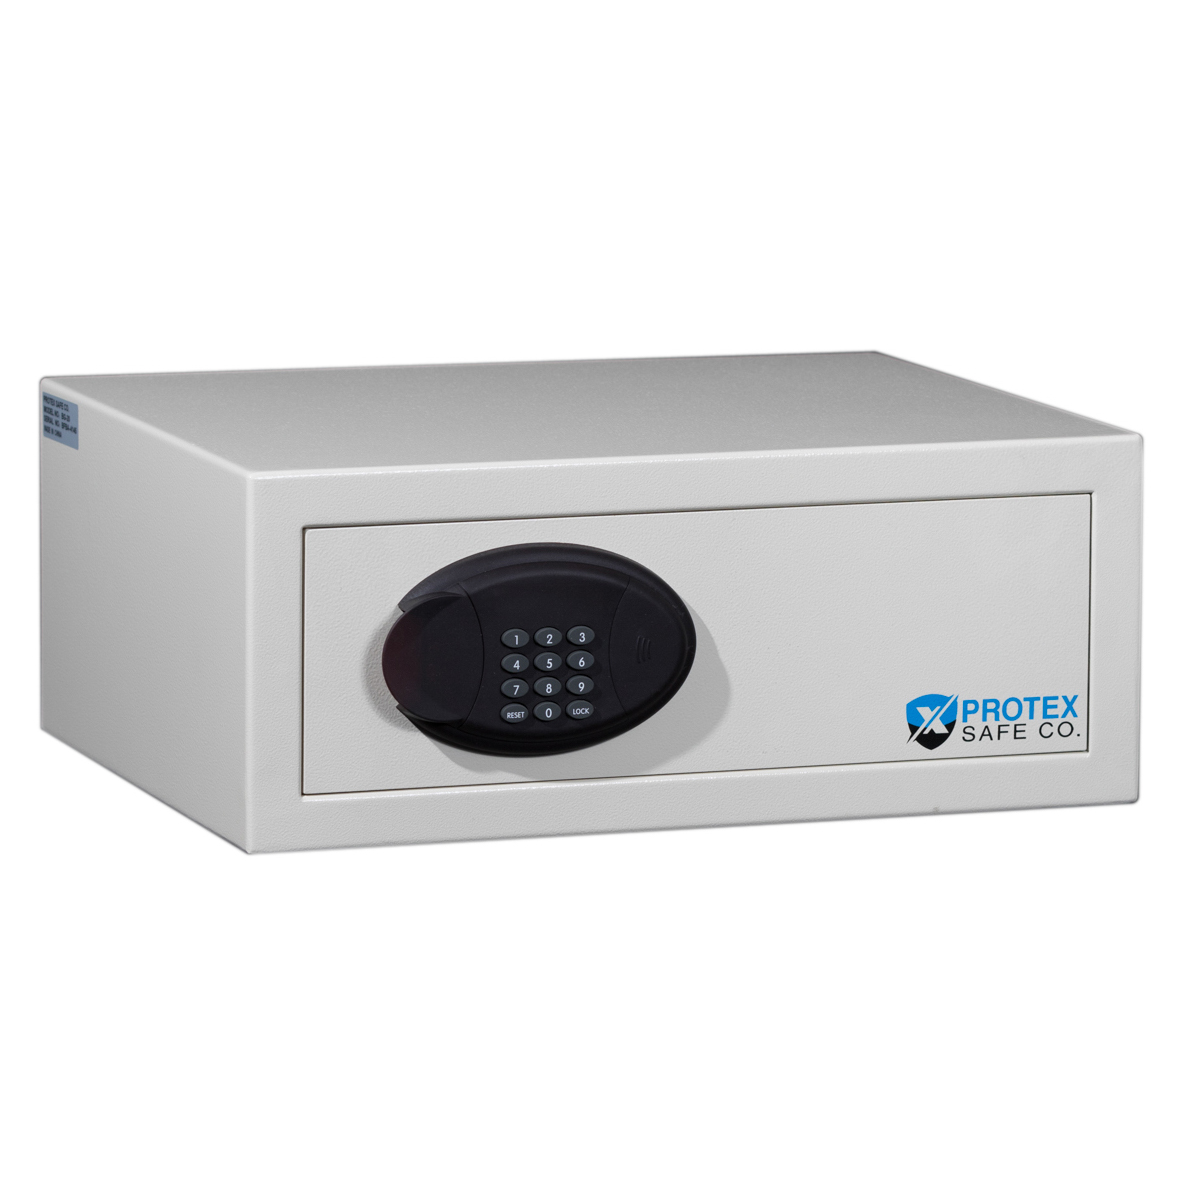 Protex Hotel/personal Laptop Electronic Safe Bg-20